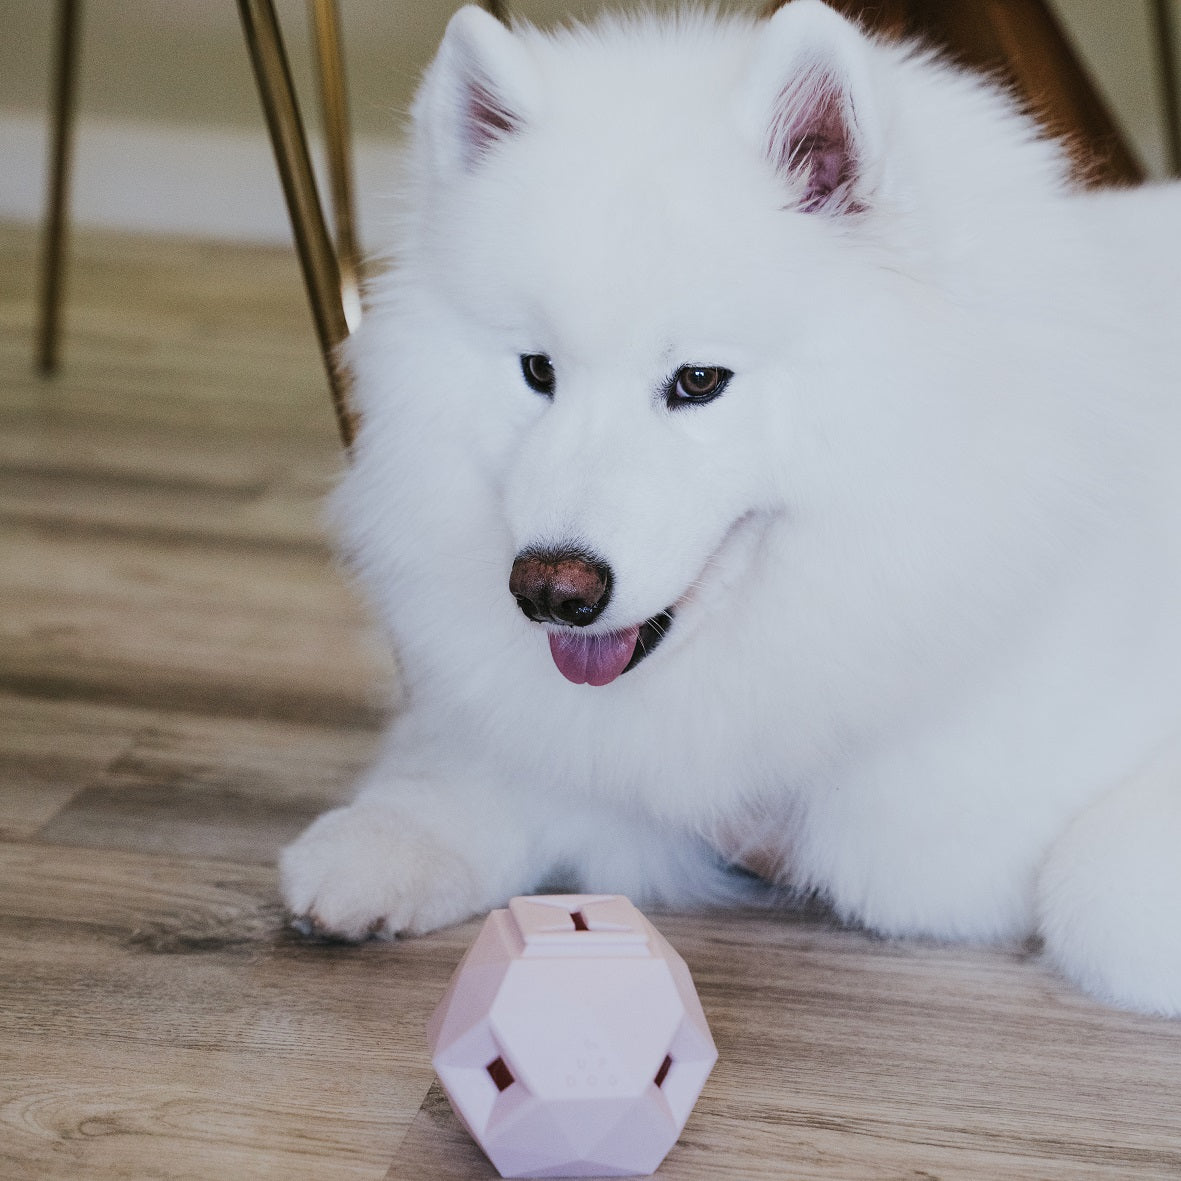 The Odin - Modern Interactive Treat Dispensing Puzzle Toy | MUi Pet Company